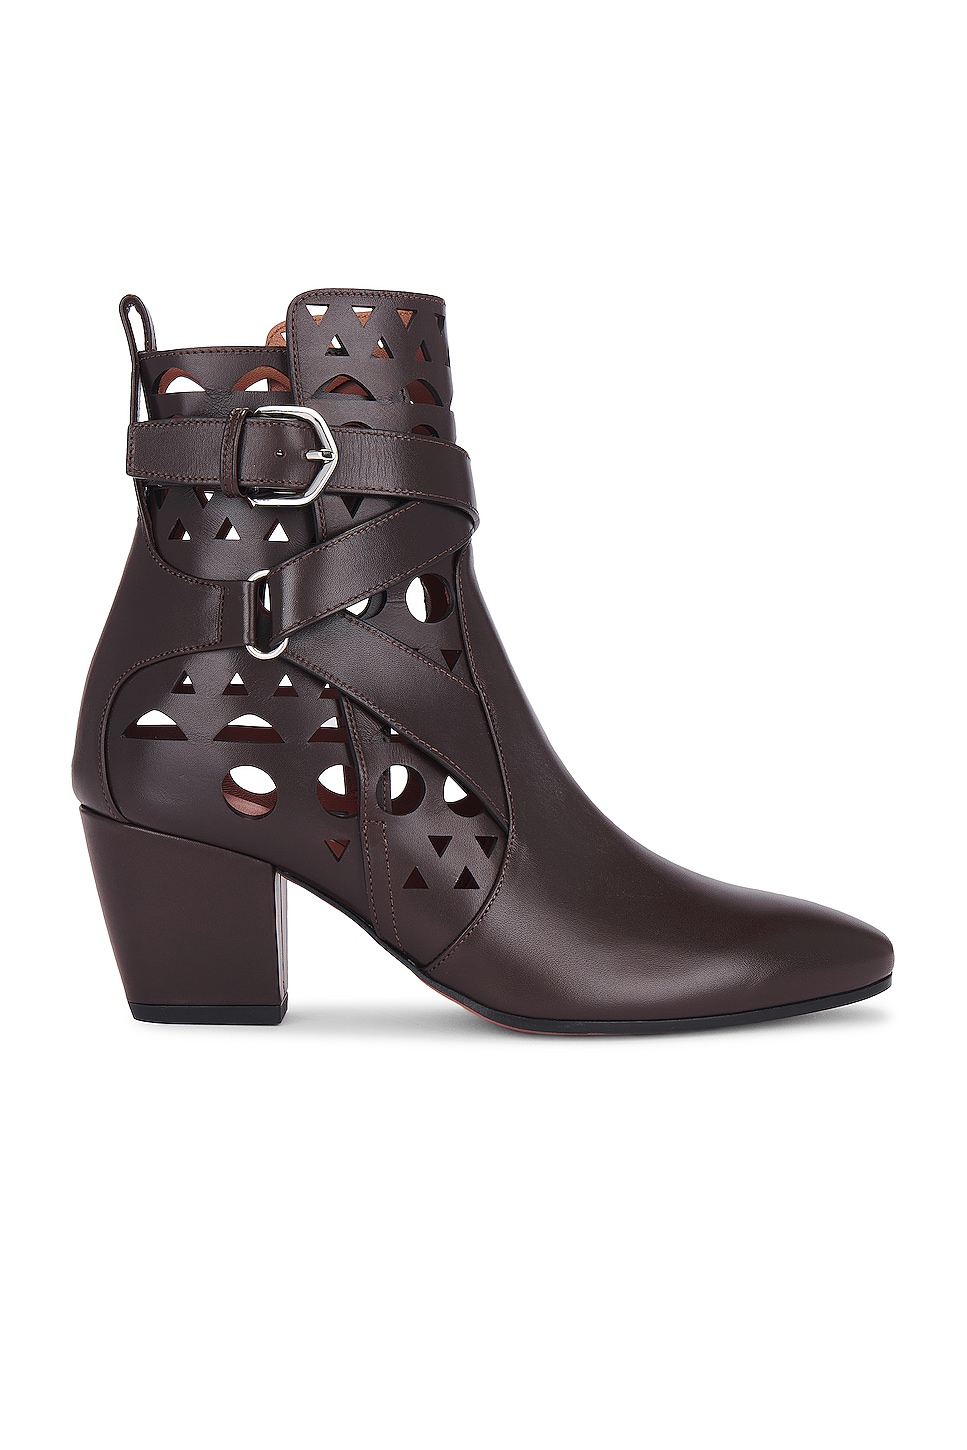 Image 1 of ALAÏA Perforated Ankle Boot in Marron Fonce